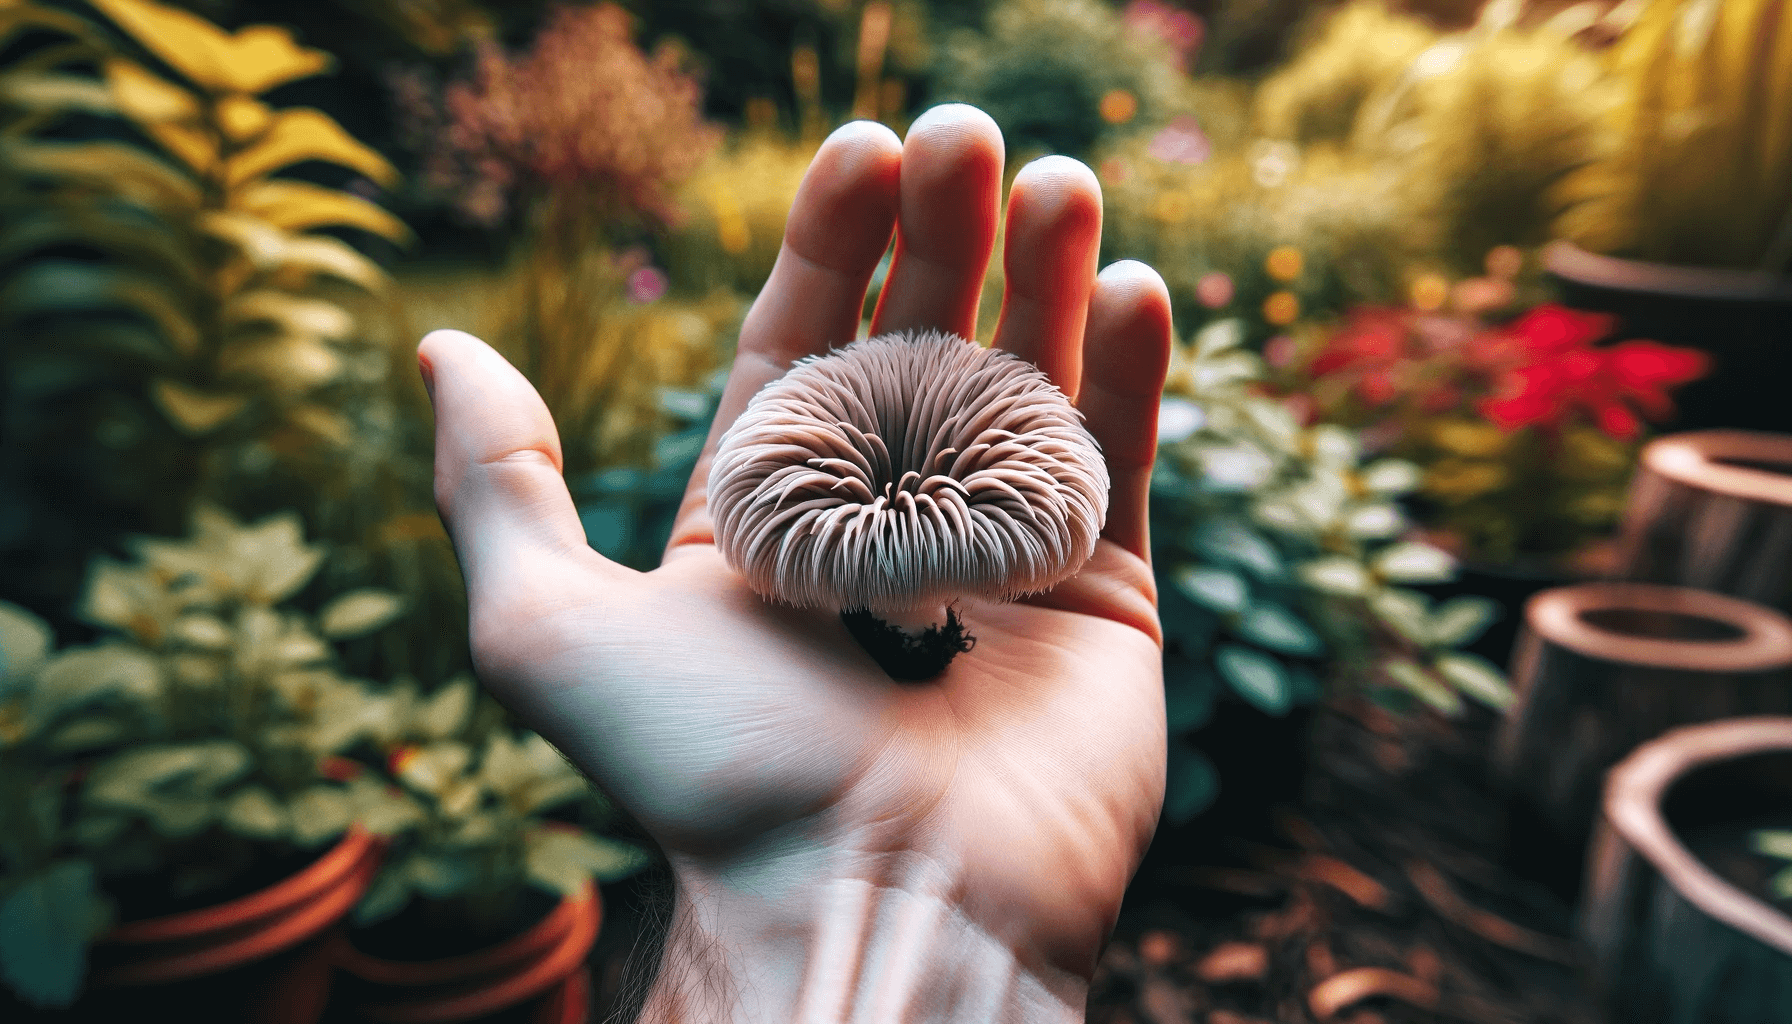 A person's hand gently holding a small Lion's Mane mushroom, illustrating the scale of the mushroom compared to the hand. The background features a gentle blur.